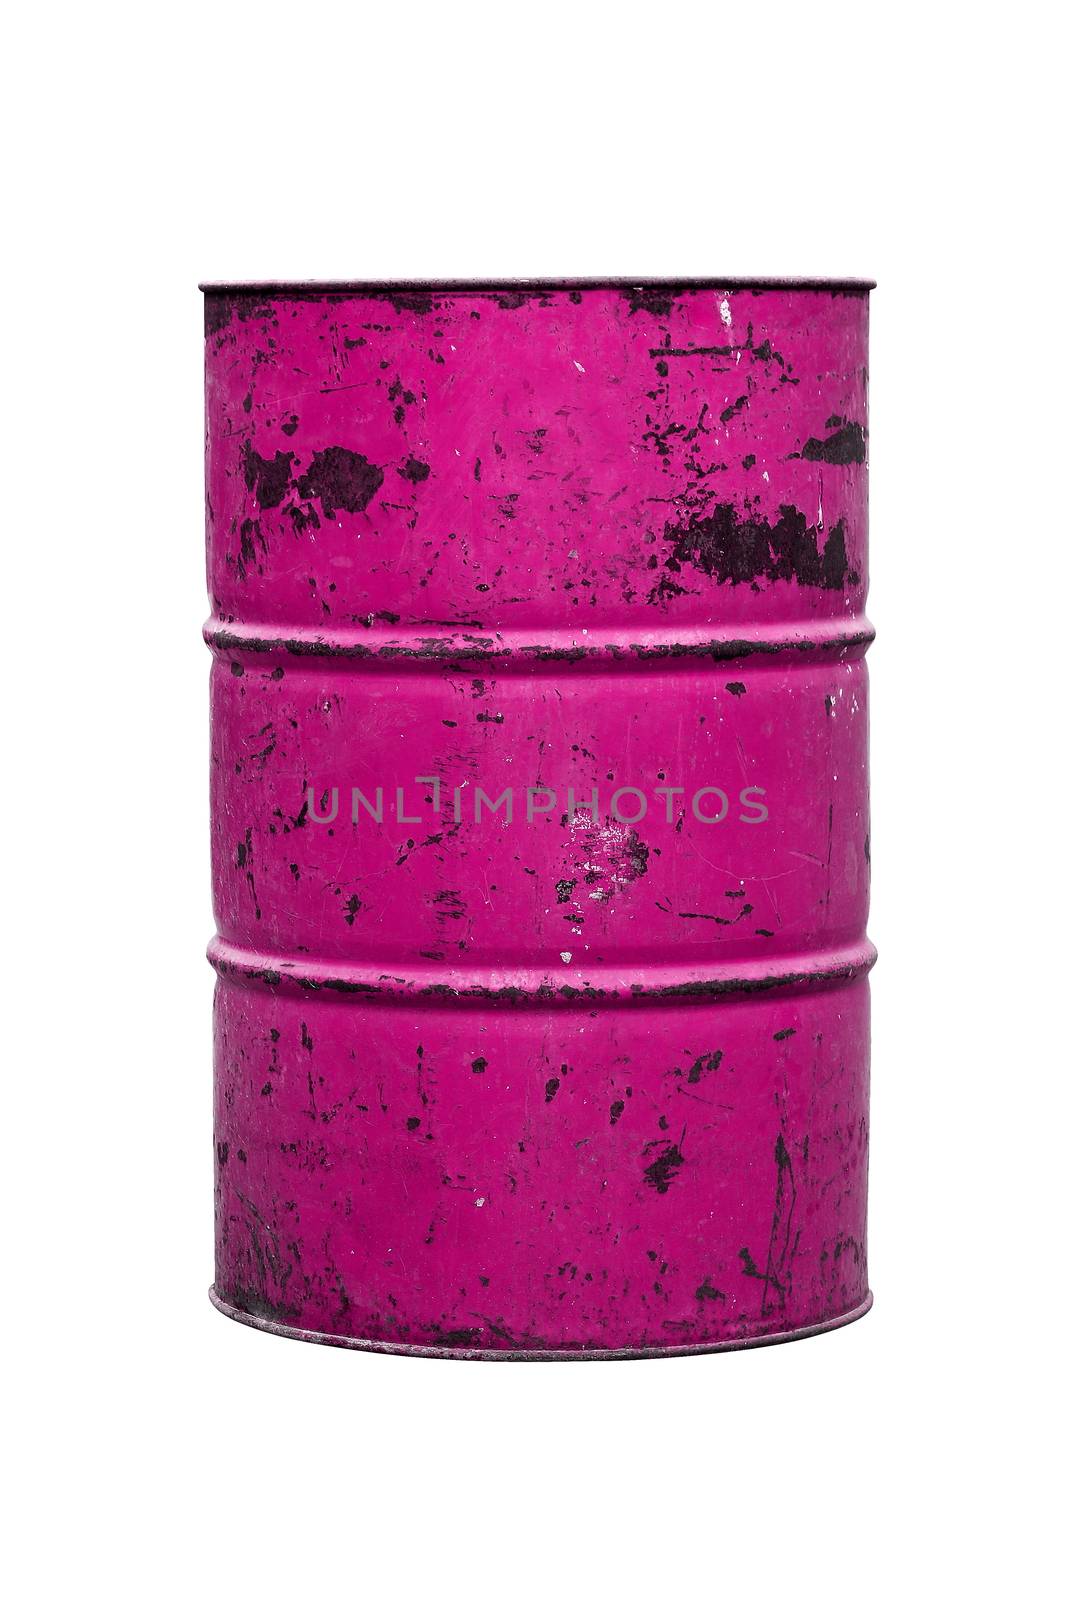 Barrel Oil pink or purple Old isolated on background white by cgdeaw